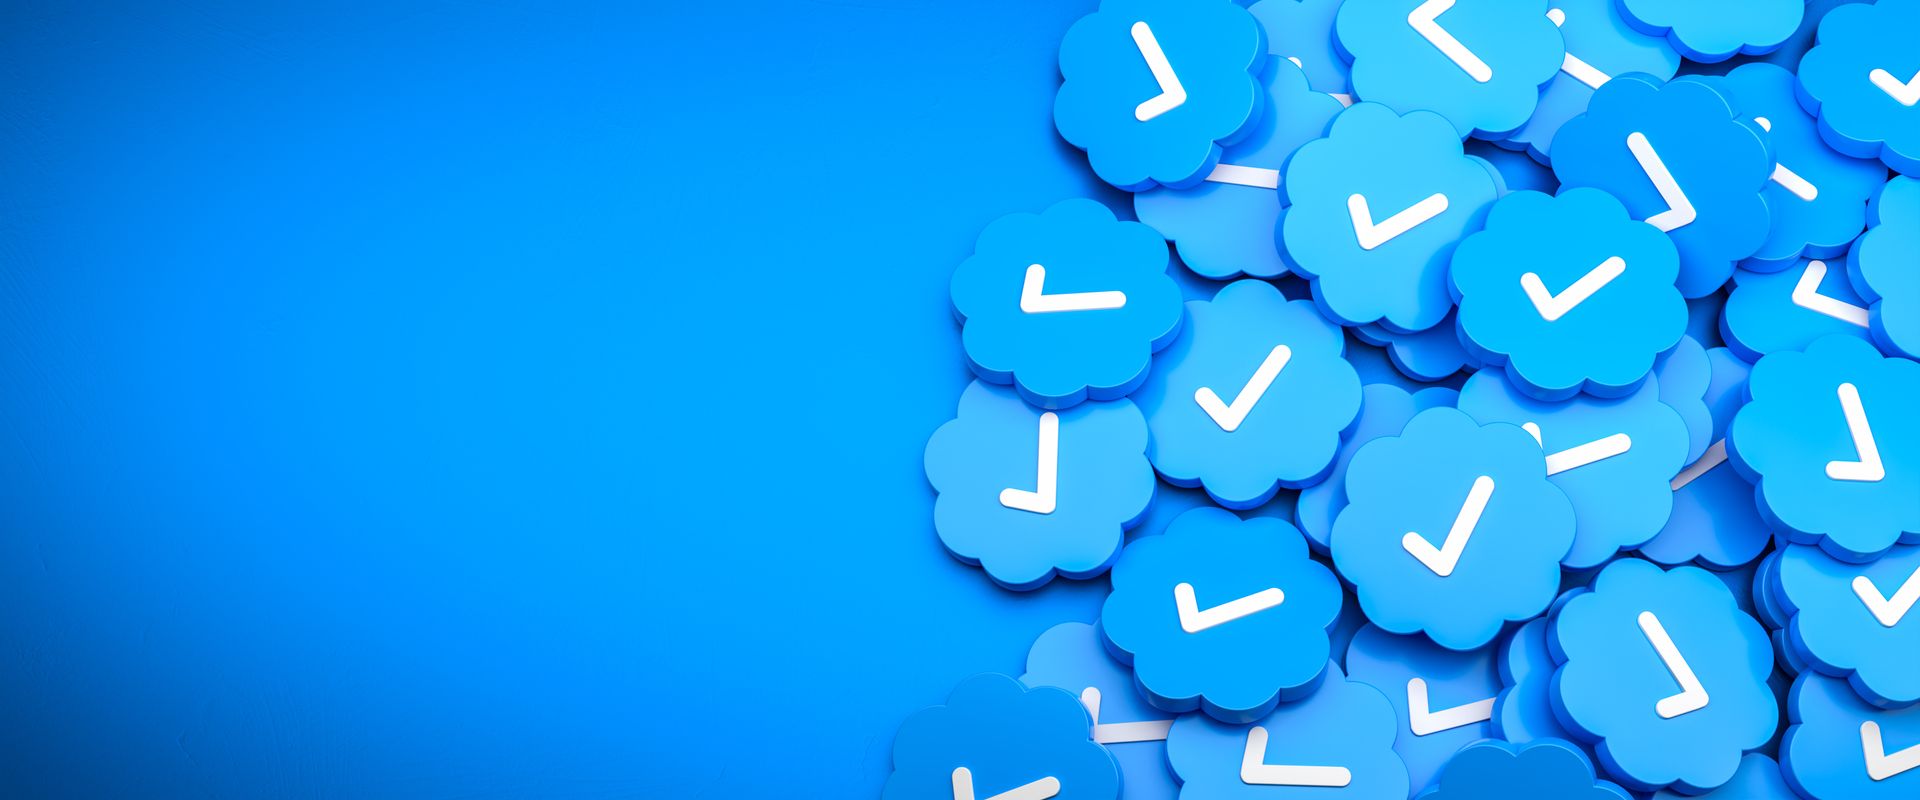 Pile of blue tick tokens stacked on a blue background